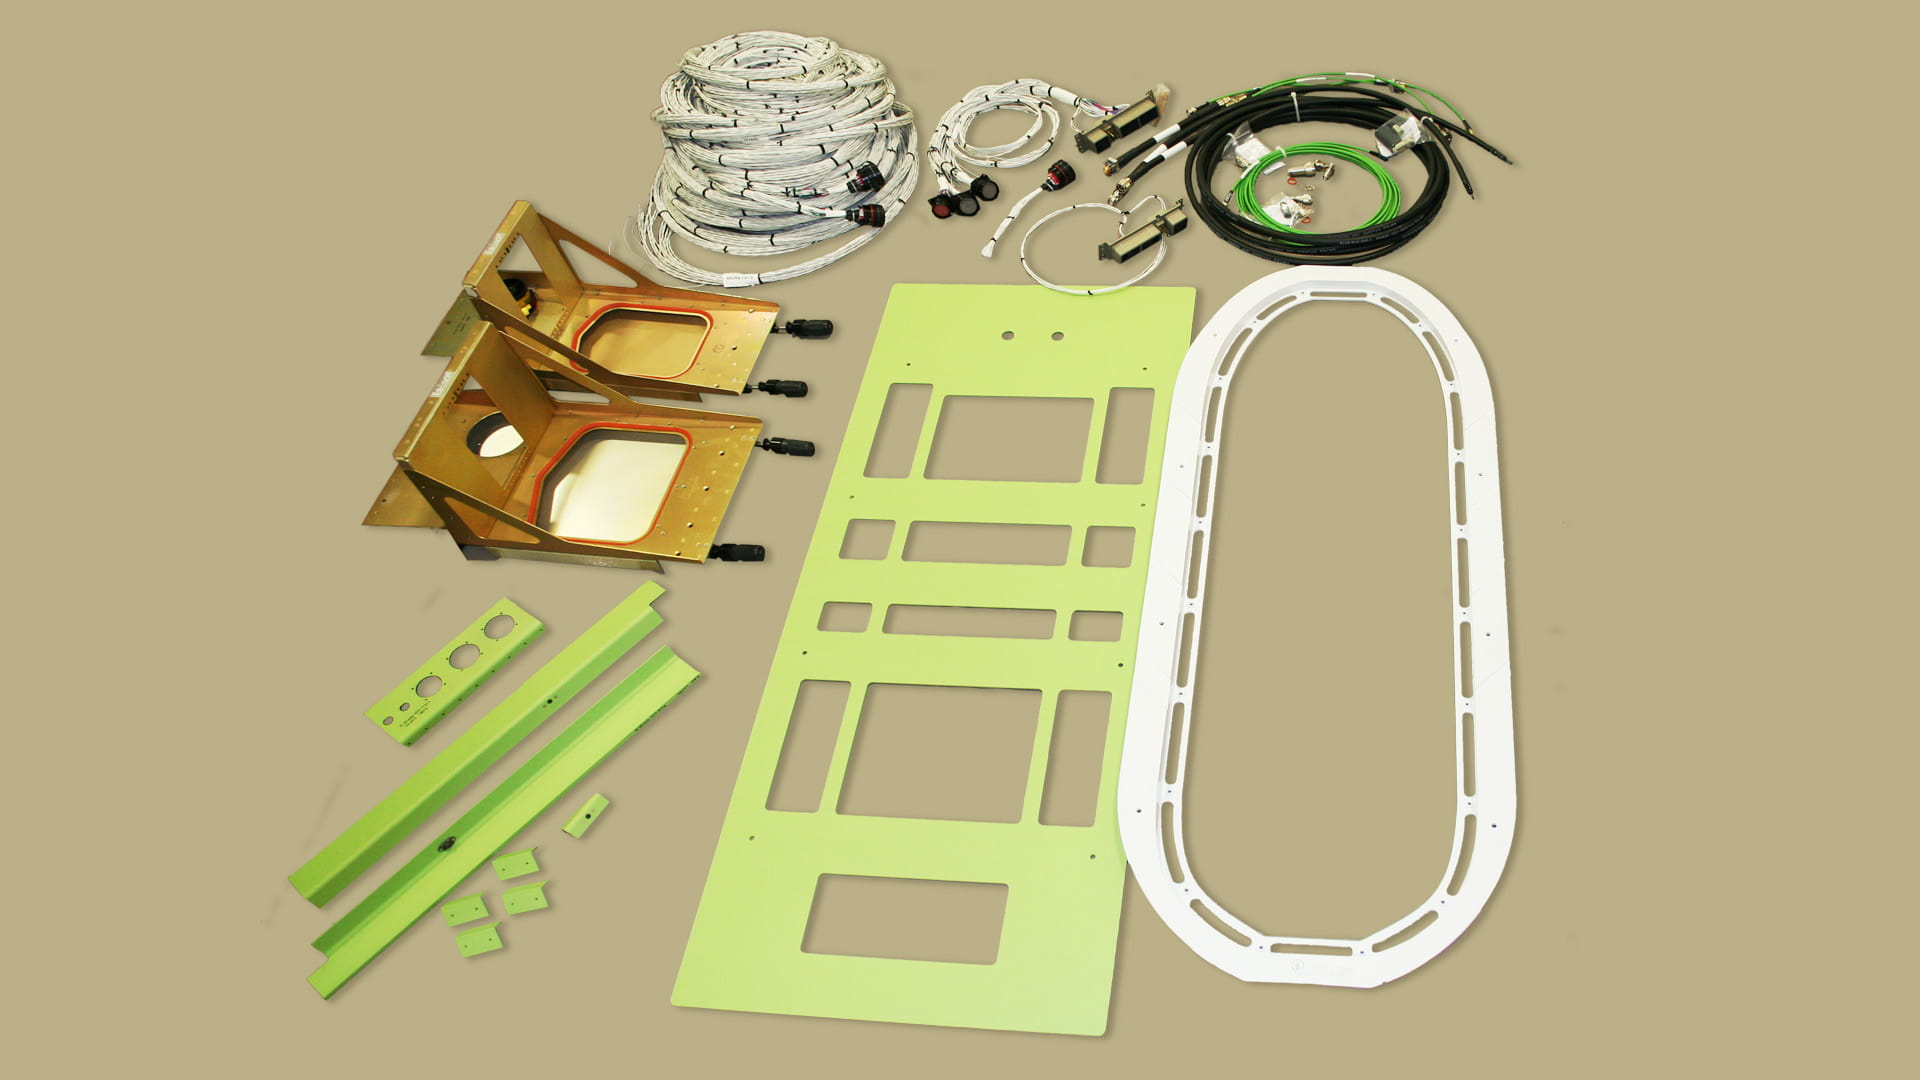 Built-to-print integrated kit